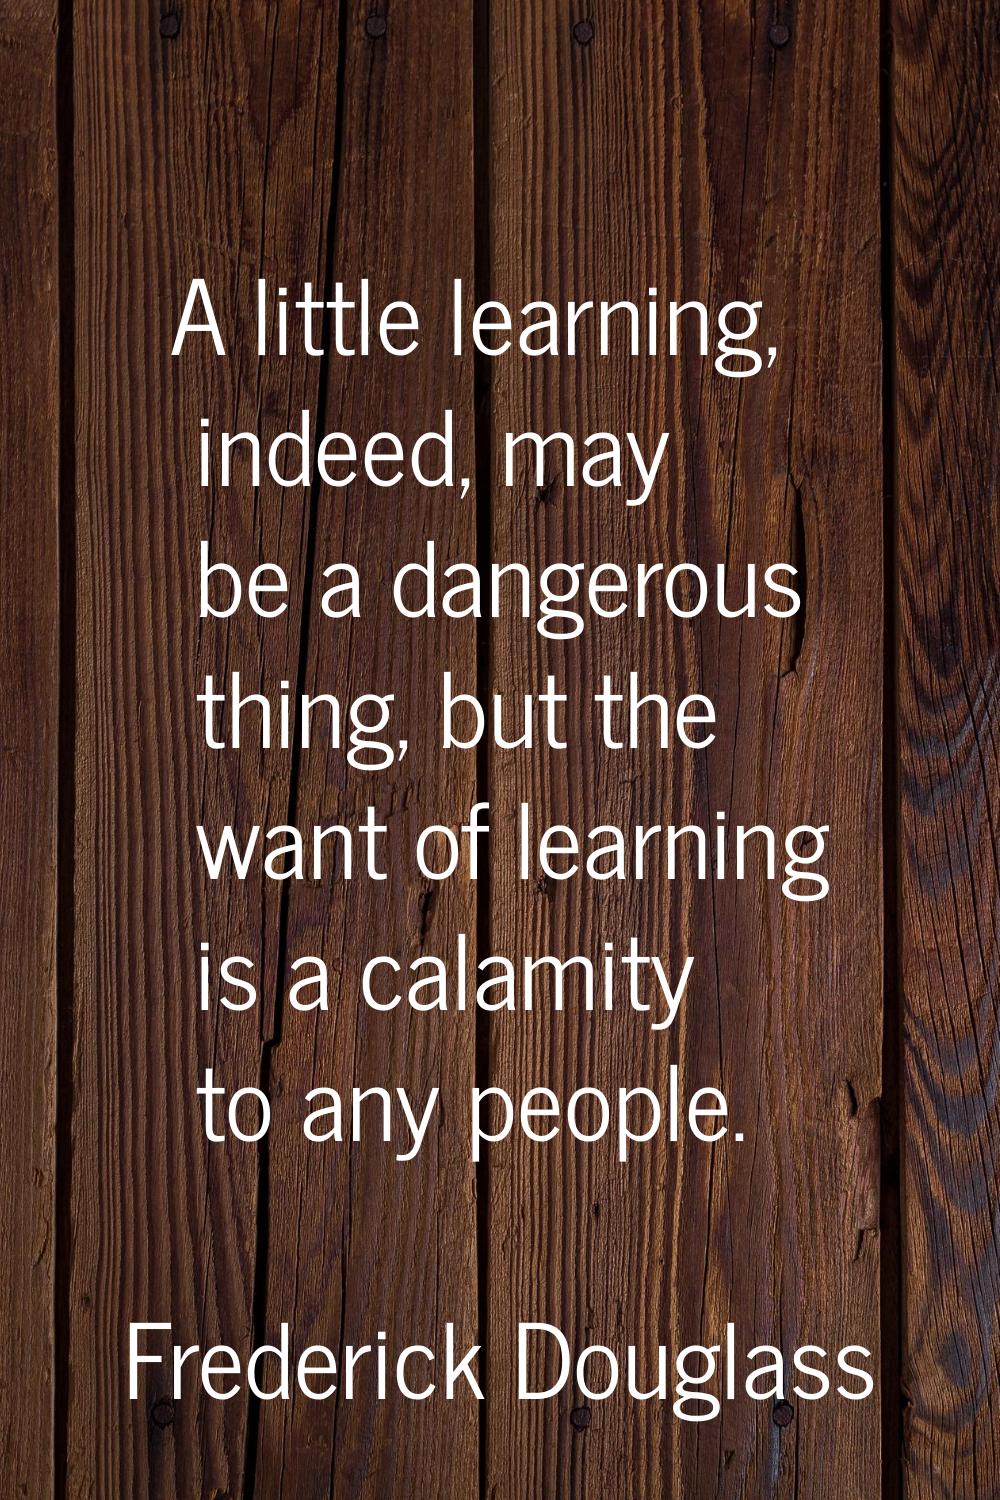 A little learning, indeed, may be a dangerous thing, but the want of learning is a calamity to any 